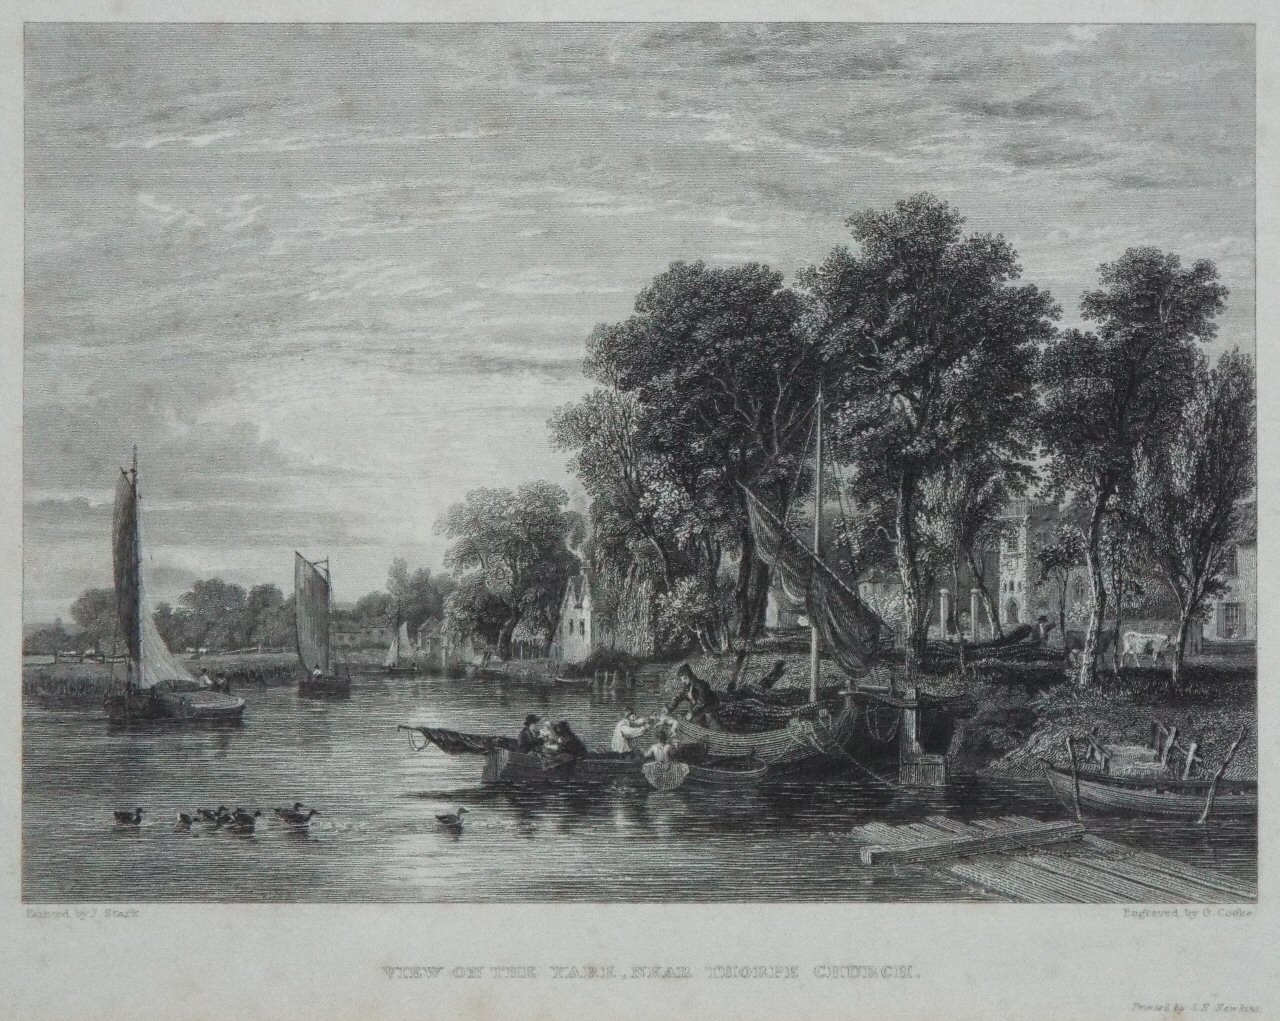 Print - View on the Yare, near Thorpe Church. - Cooke